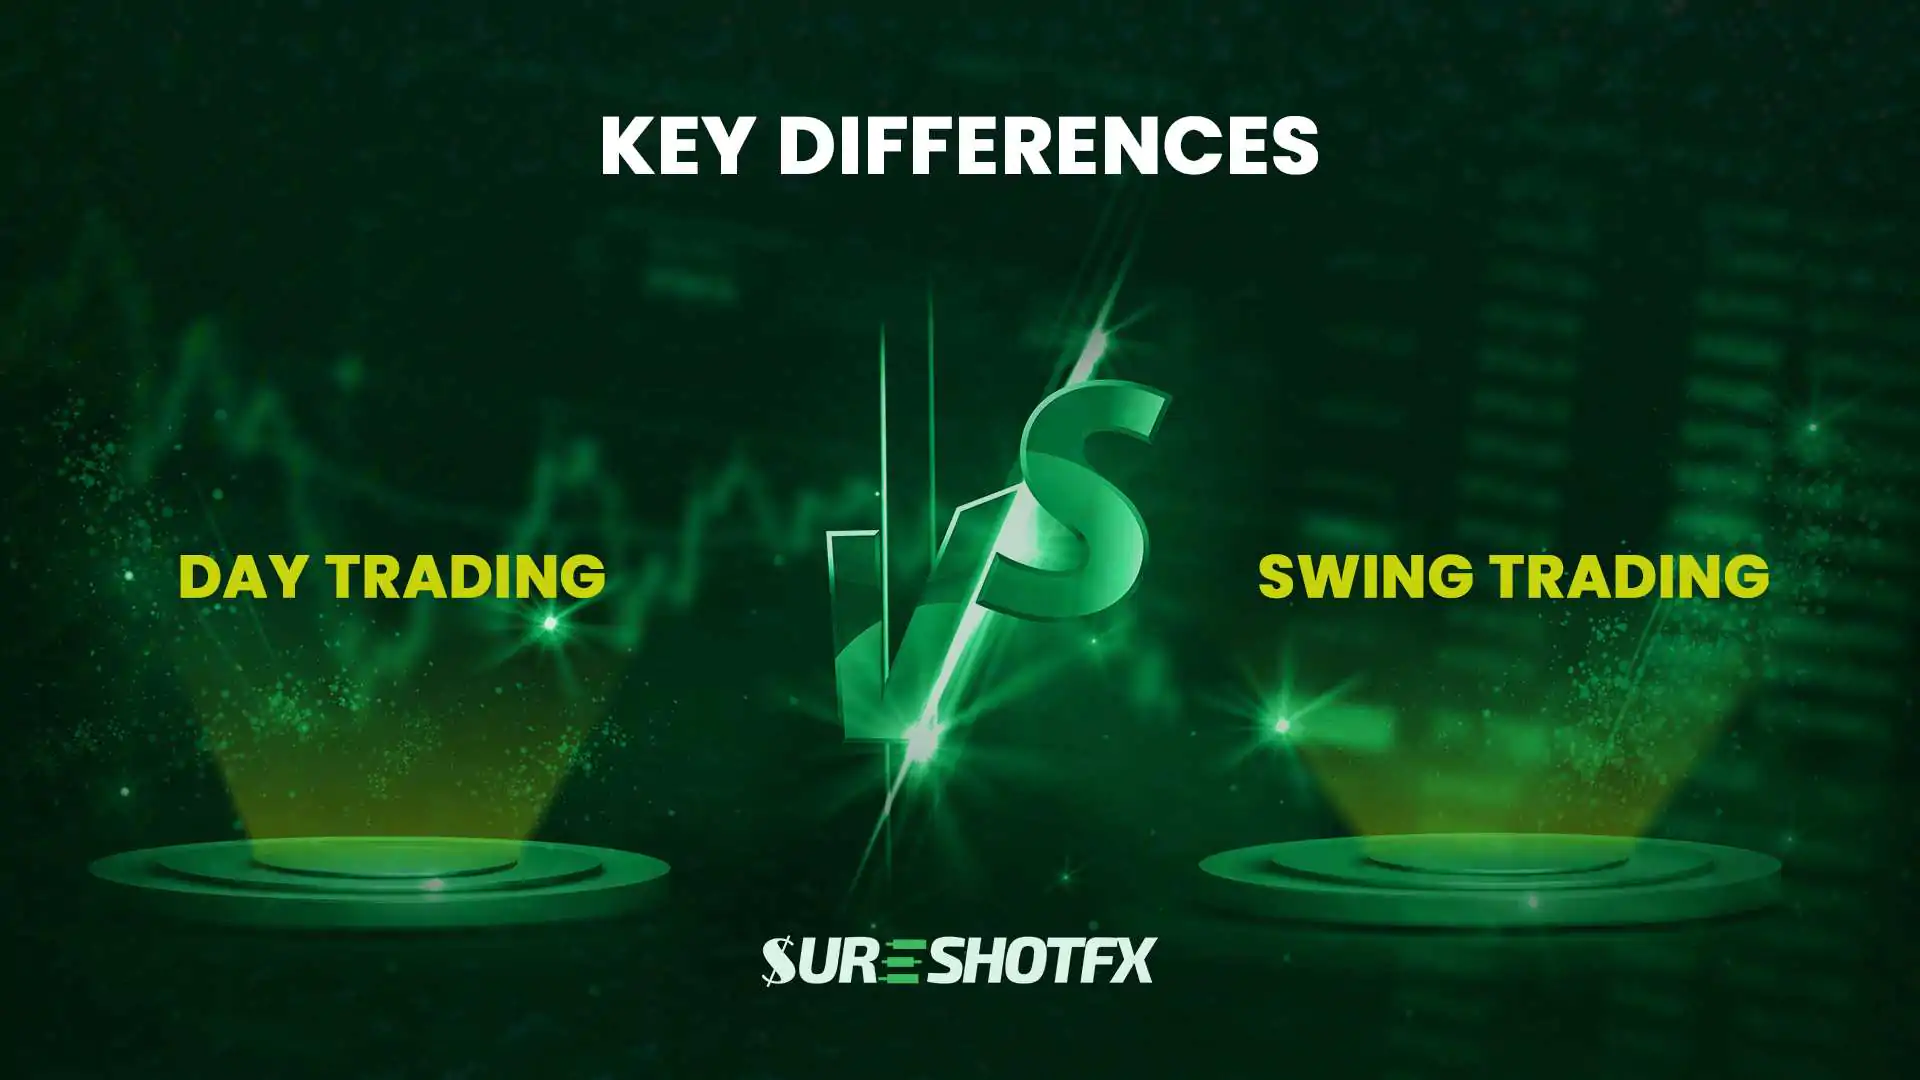 SureshotFX Day Trading vs Swing Trading Feature Photo showing Key Differences in Text.